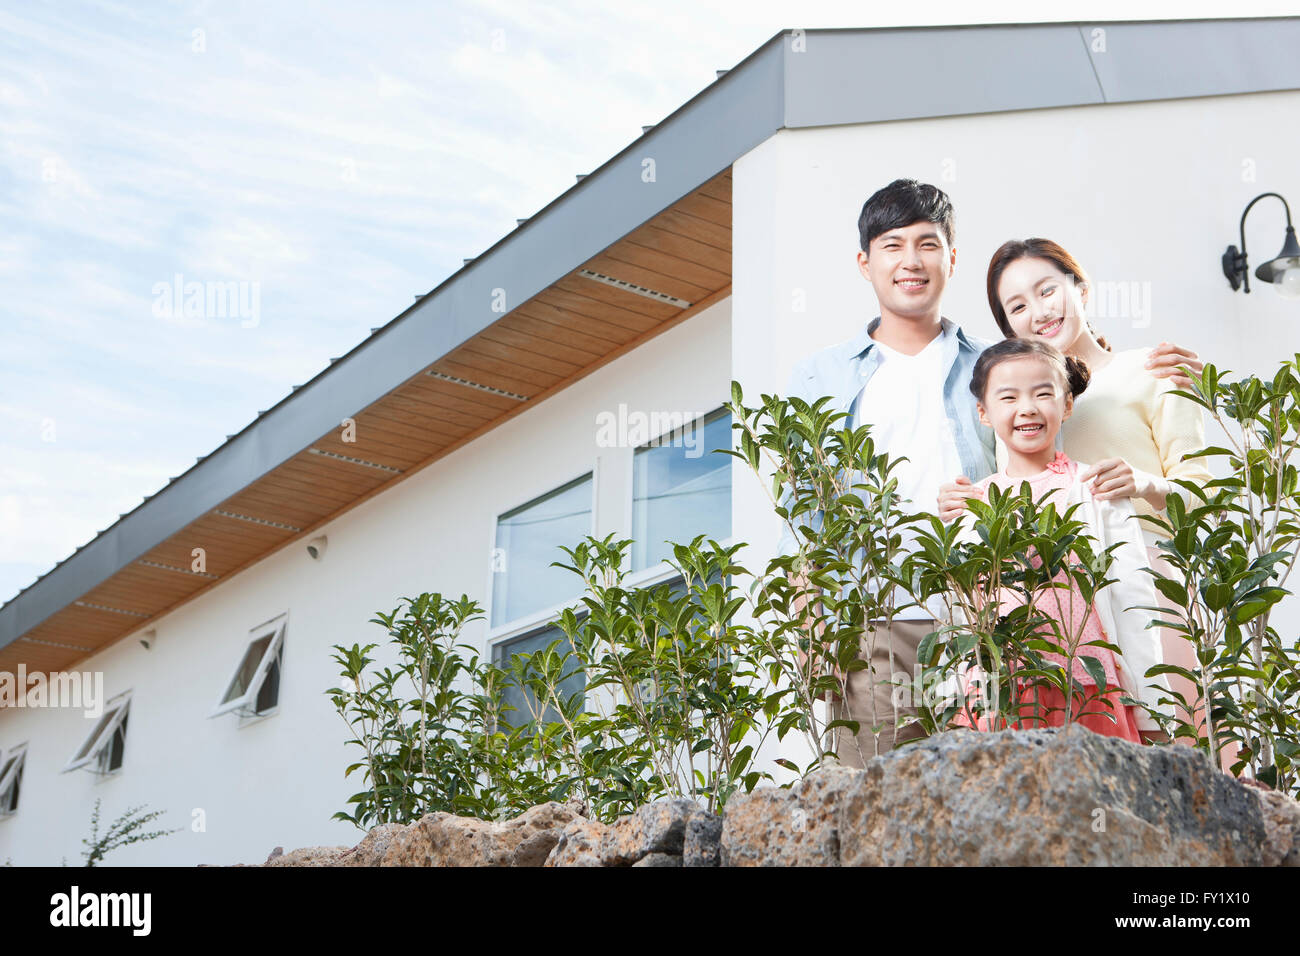 Family being happy at the yard of their house representing rural living Stock Photo